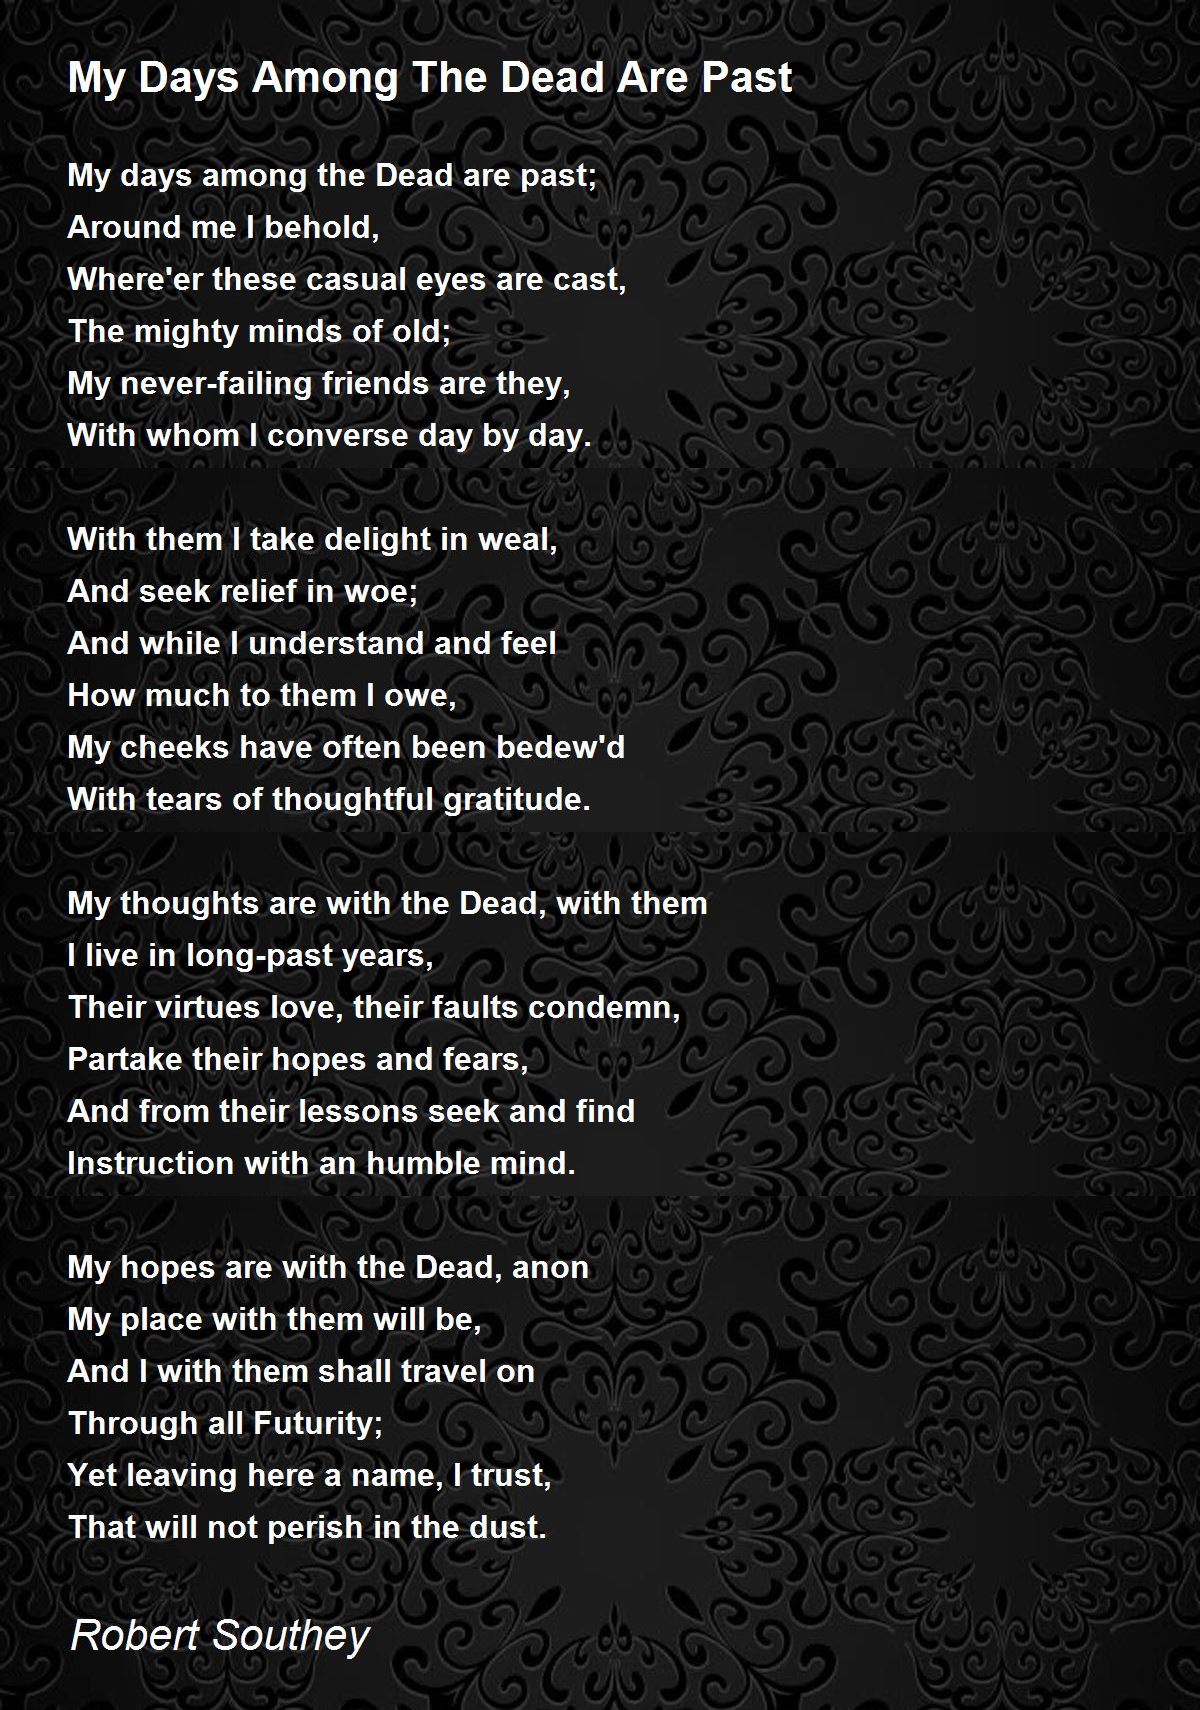 My Days Among The Dead Are Past Poem by Robert Southey - Poem Hunter